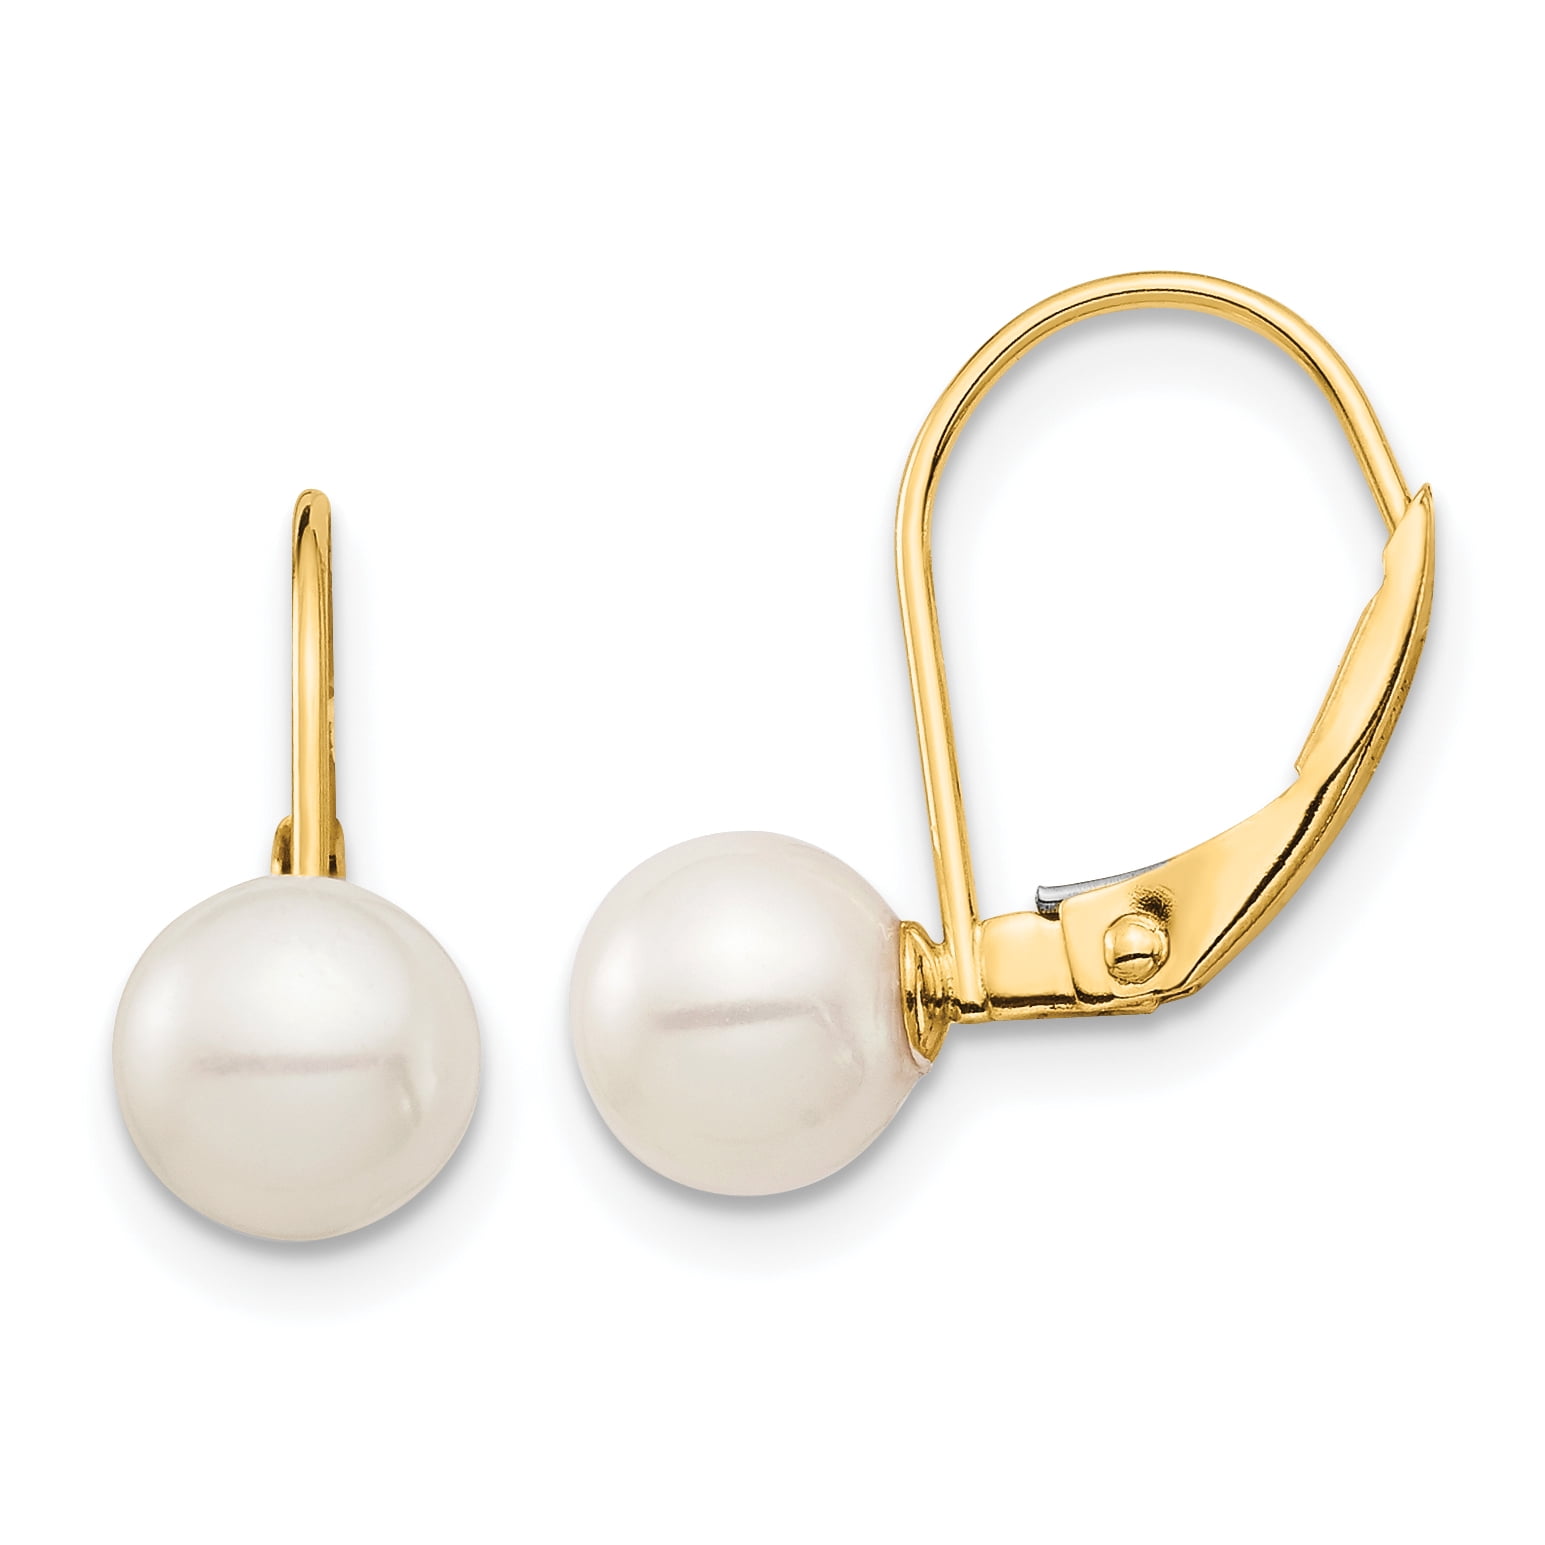 Details about   Real 14kt Yellow Gold Madi K Freshwater Cultured Pearl Teardrop Earrings 